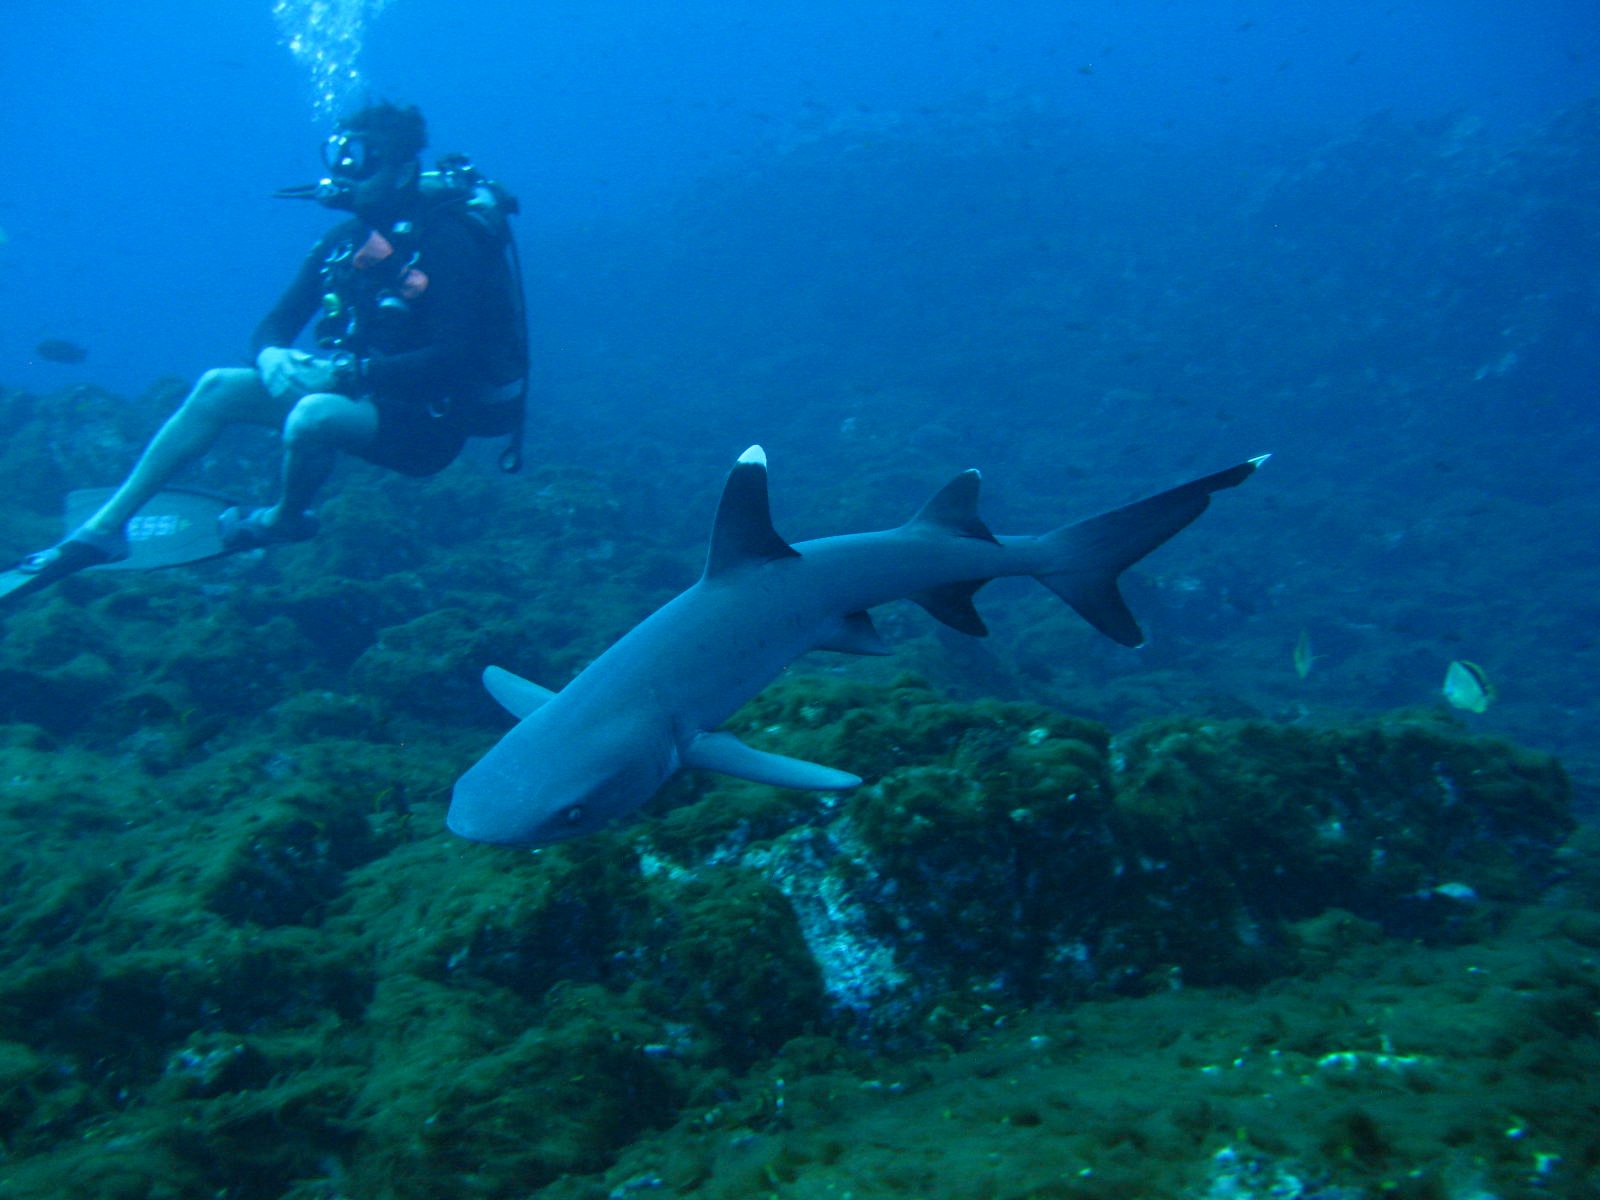 white tip shark swims by relaxed observing diver